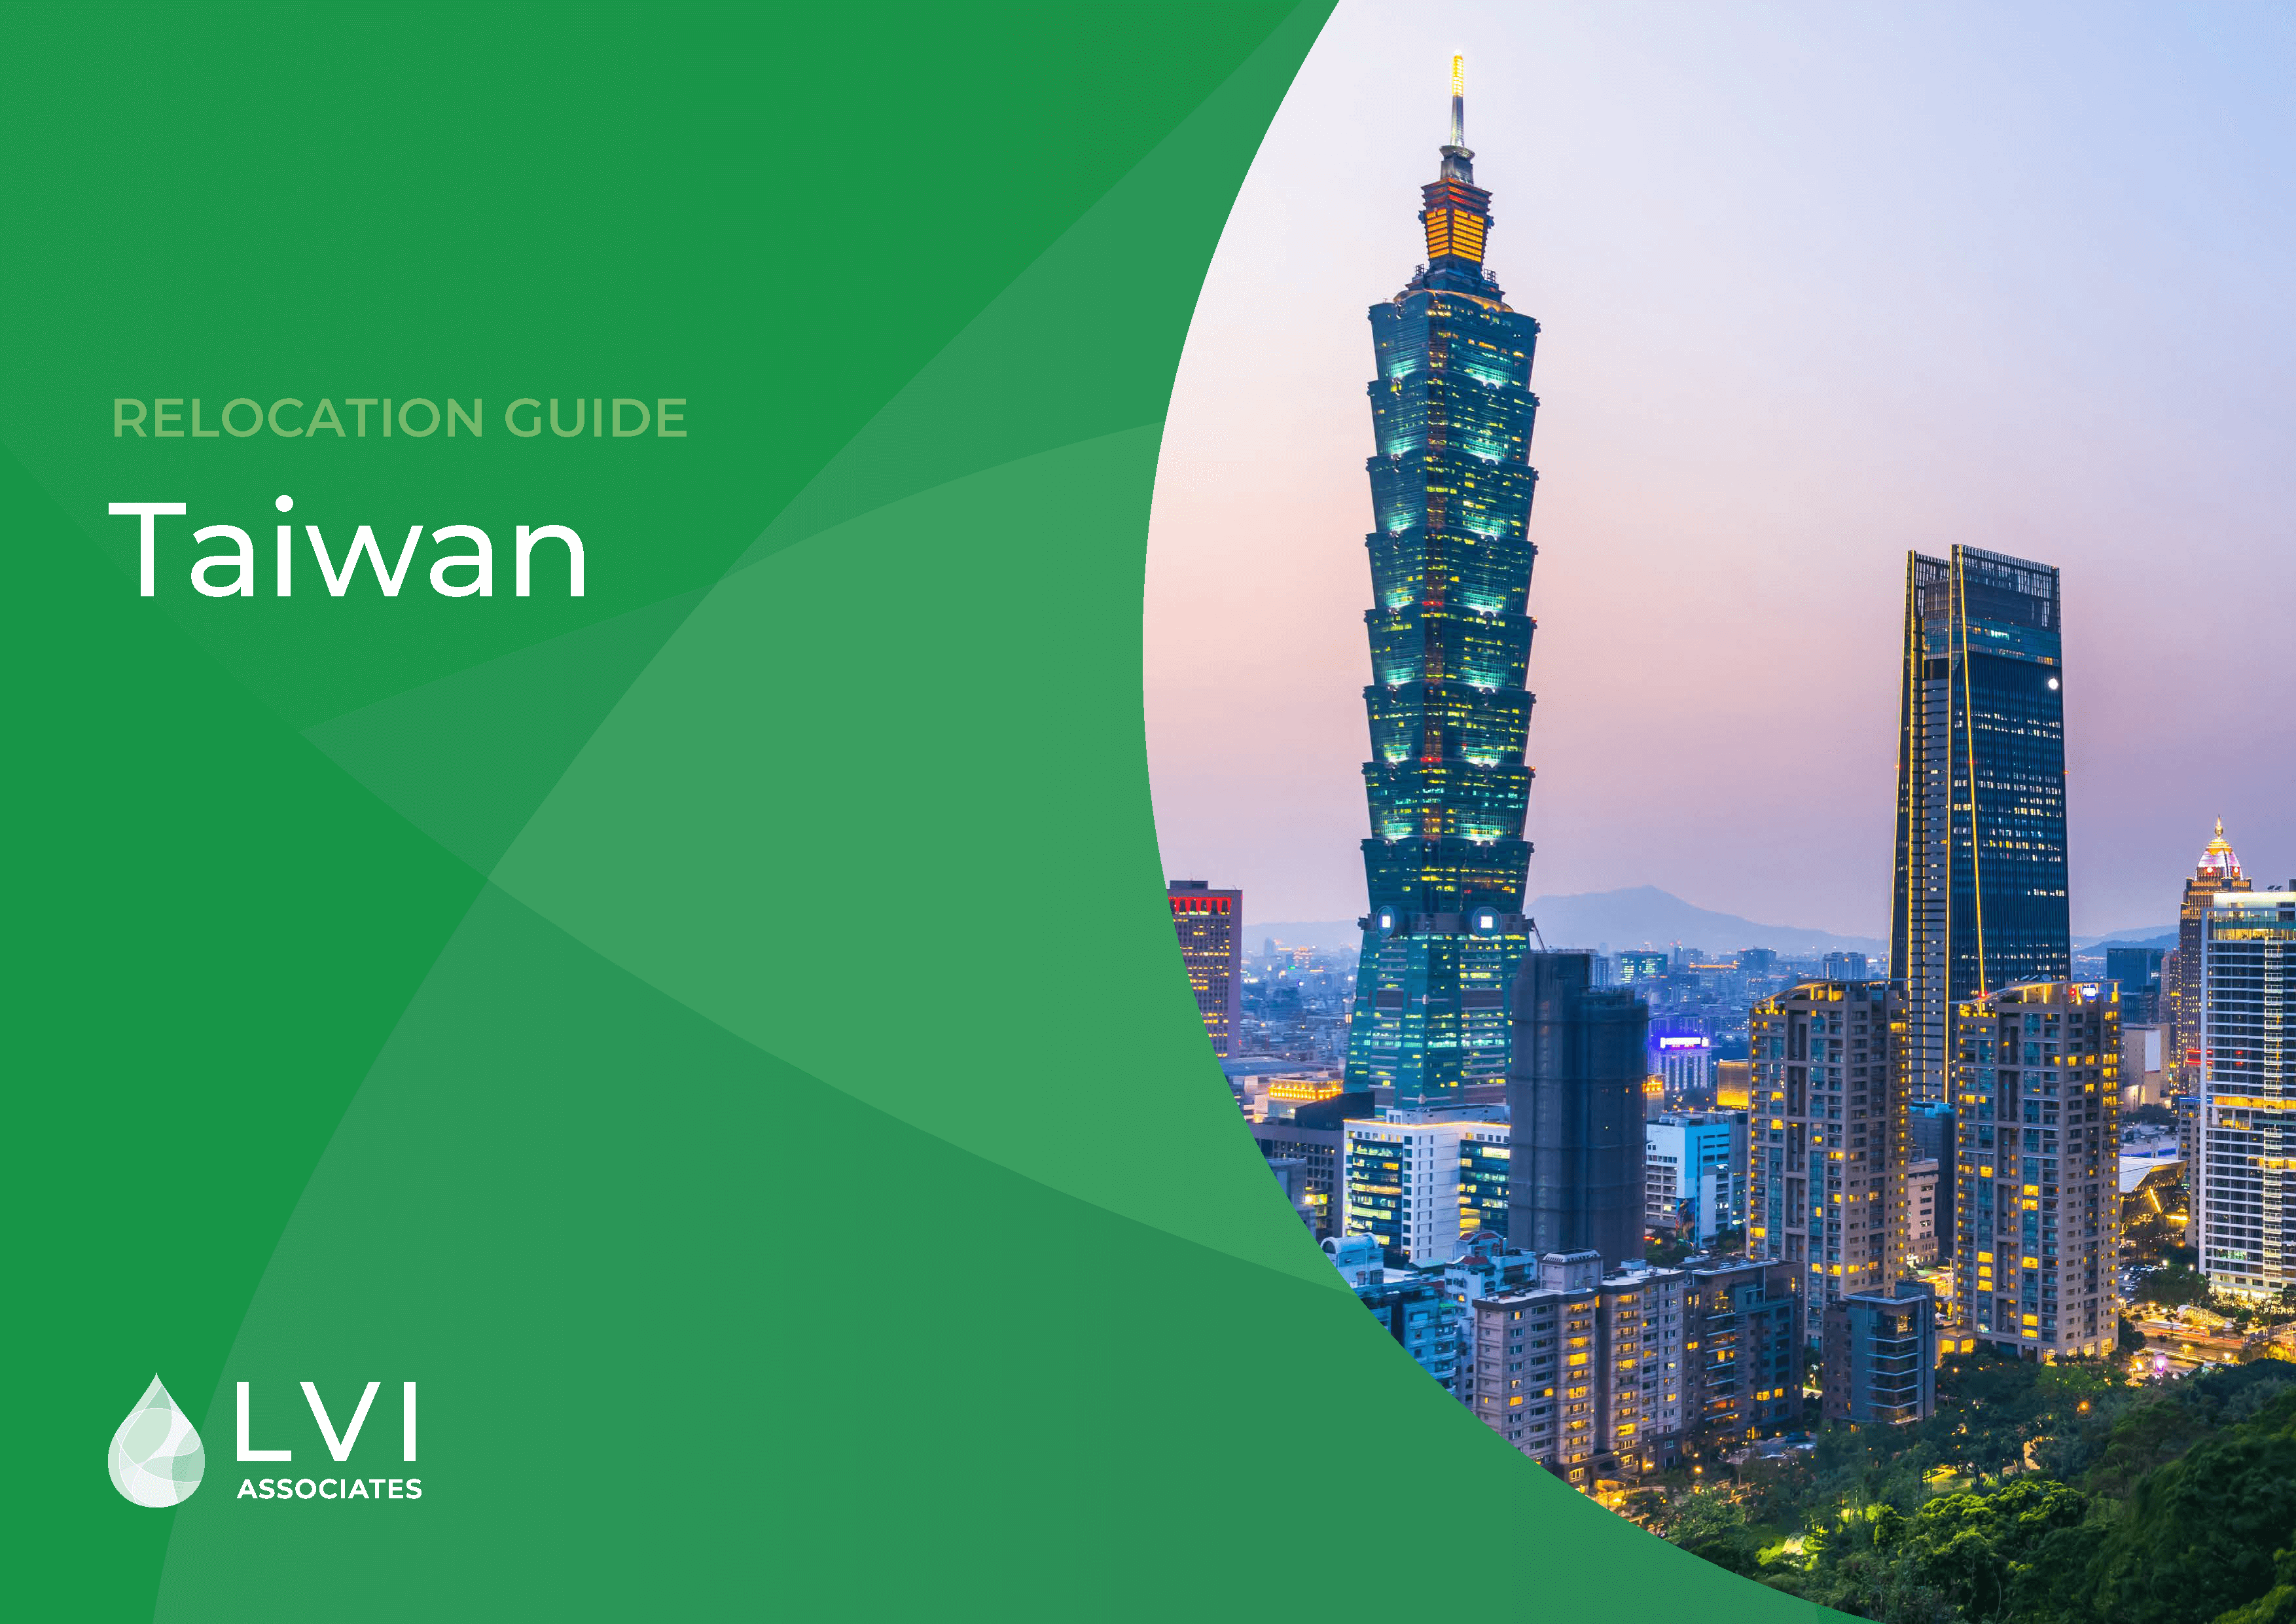 Taiwan Relocation Guide